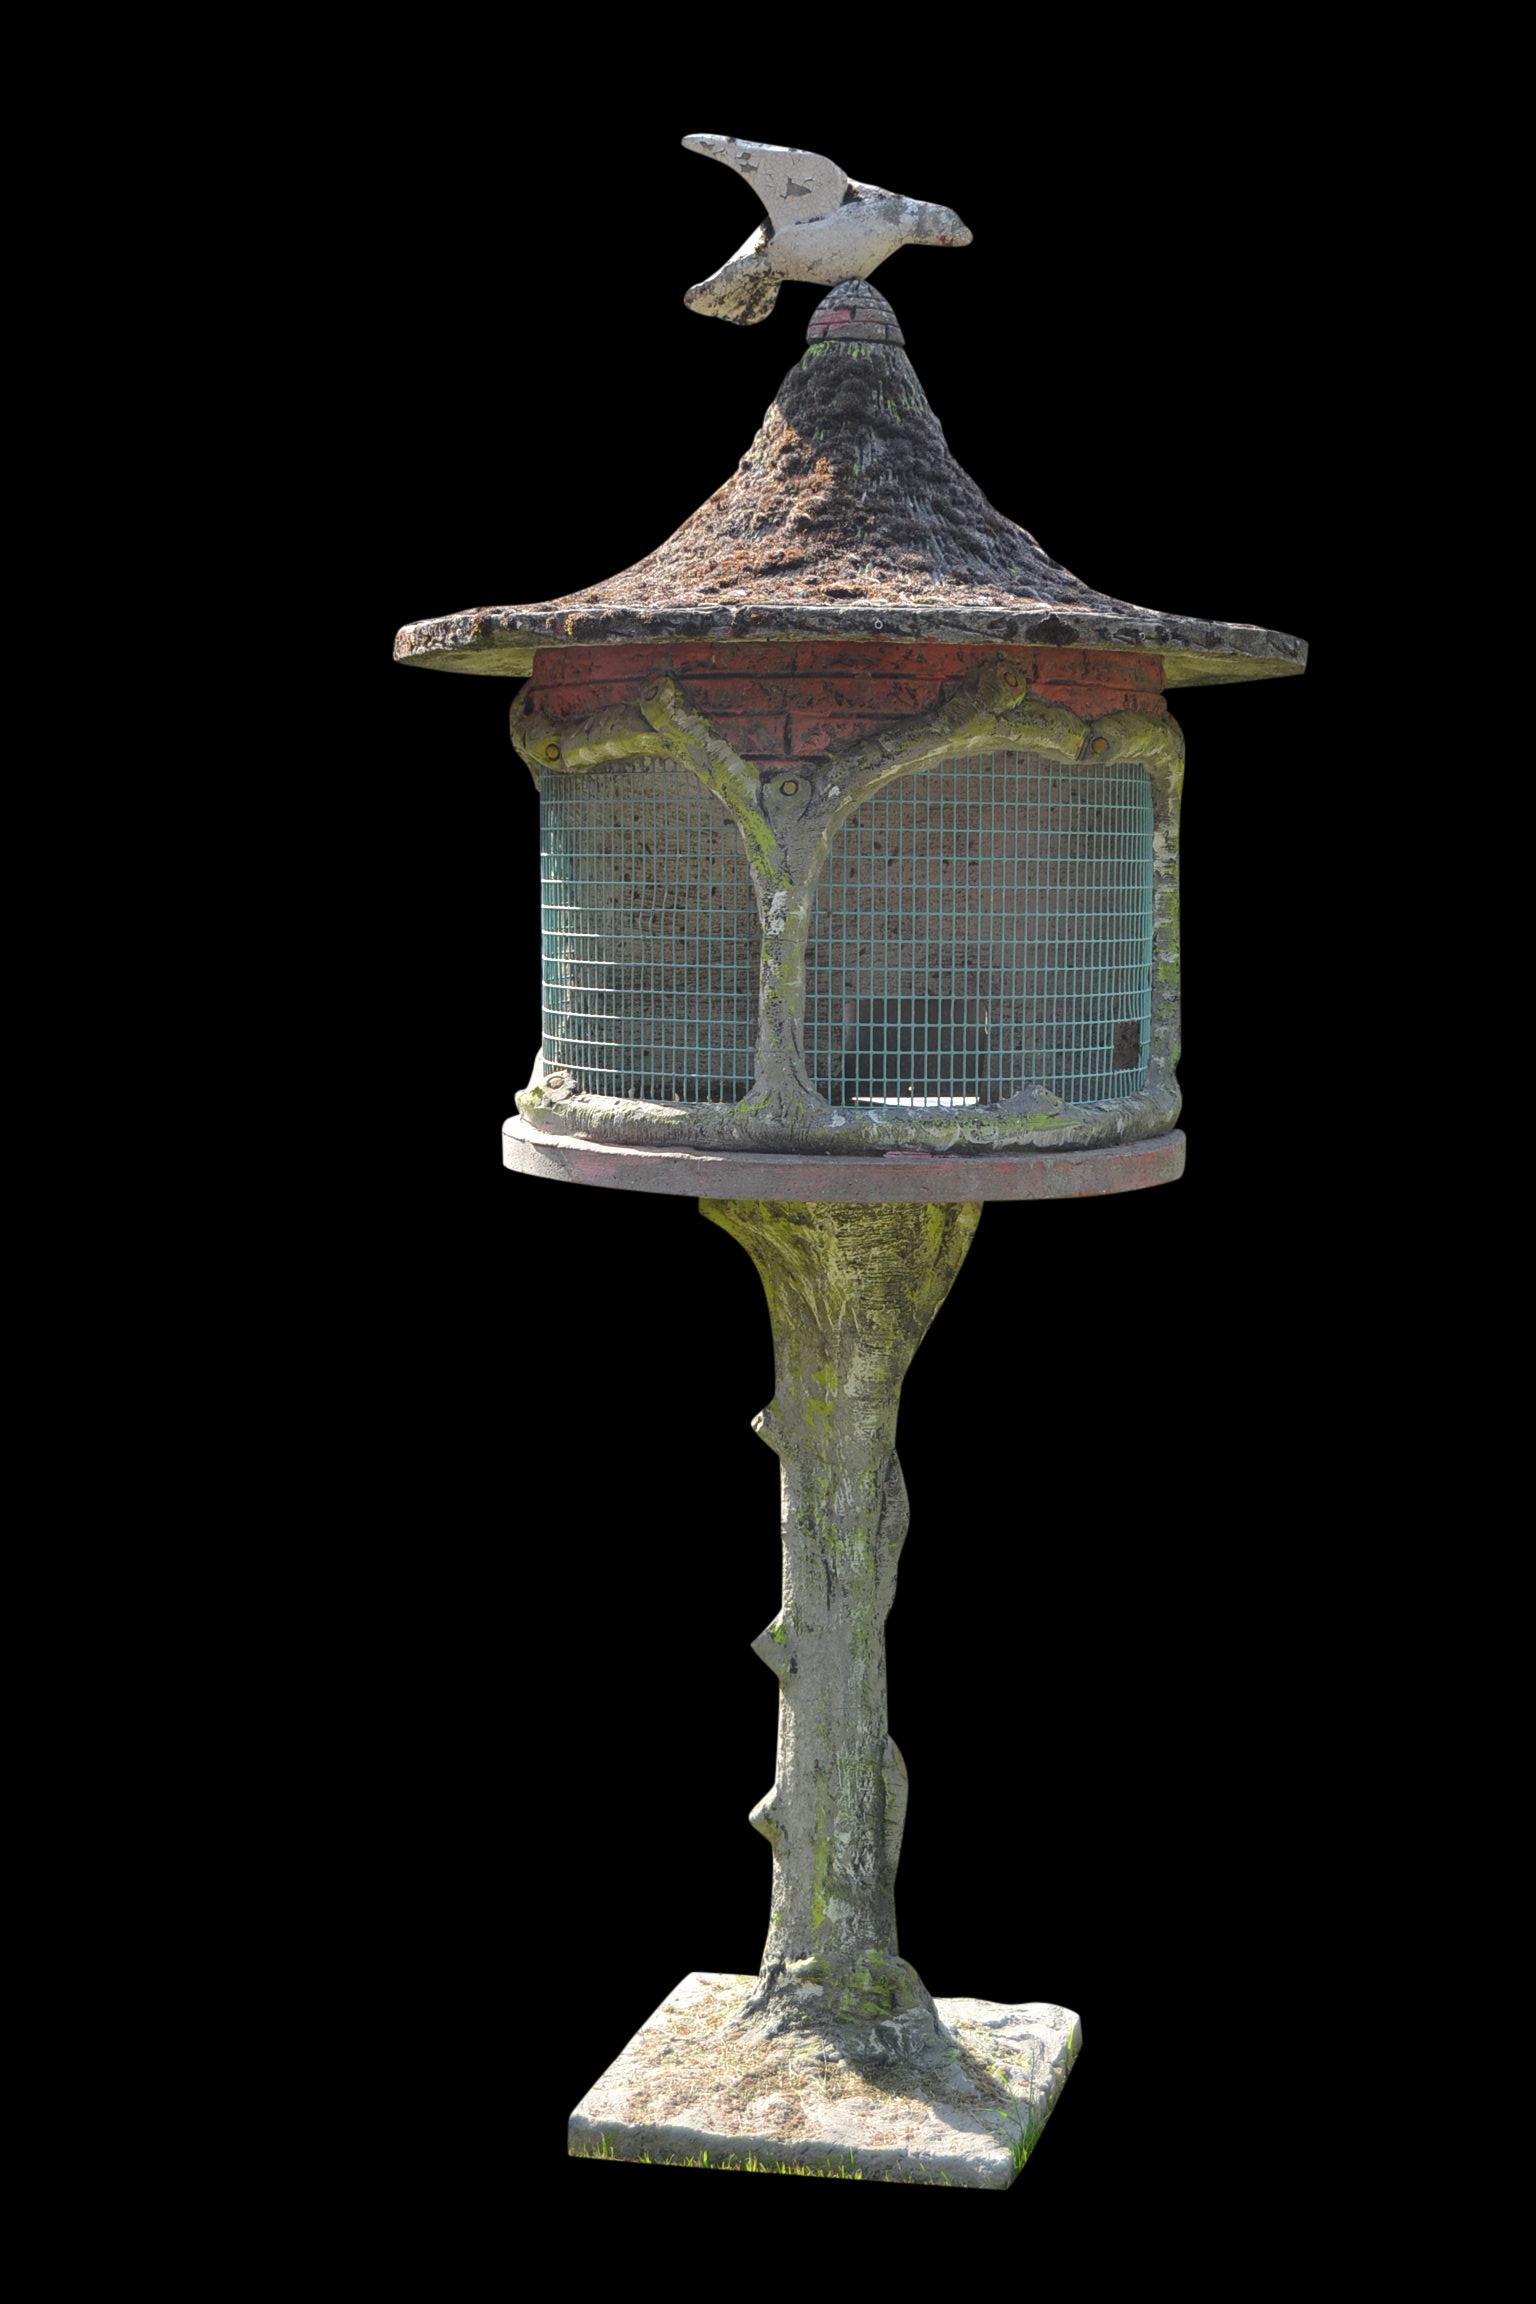 1970s Concrete birdcage. 
A stylish large outside birdcage for garden, patio, terrace, roof terrace or rooftop garden. It's a vintage Faux Bois Birdcage made of Concrete - Composition Stone - Stone. With a great use of colors.
The Aviary has still